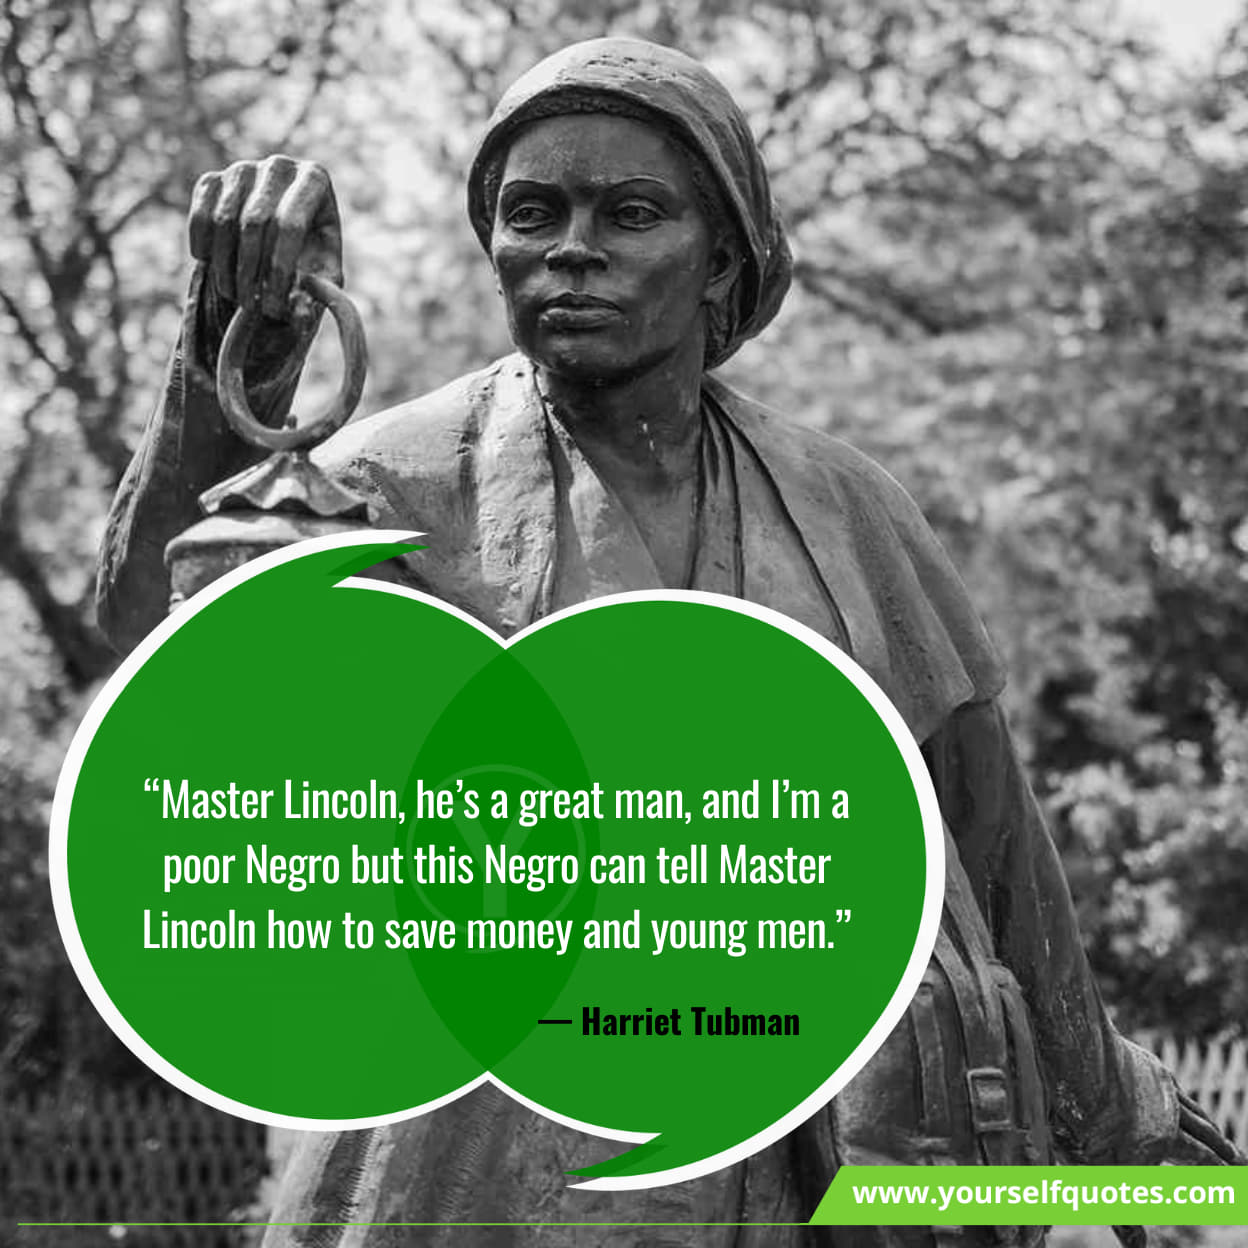 Harriet Tubman quotes on liberation and resistance